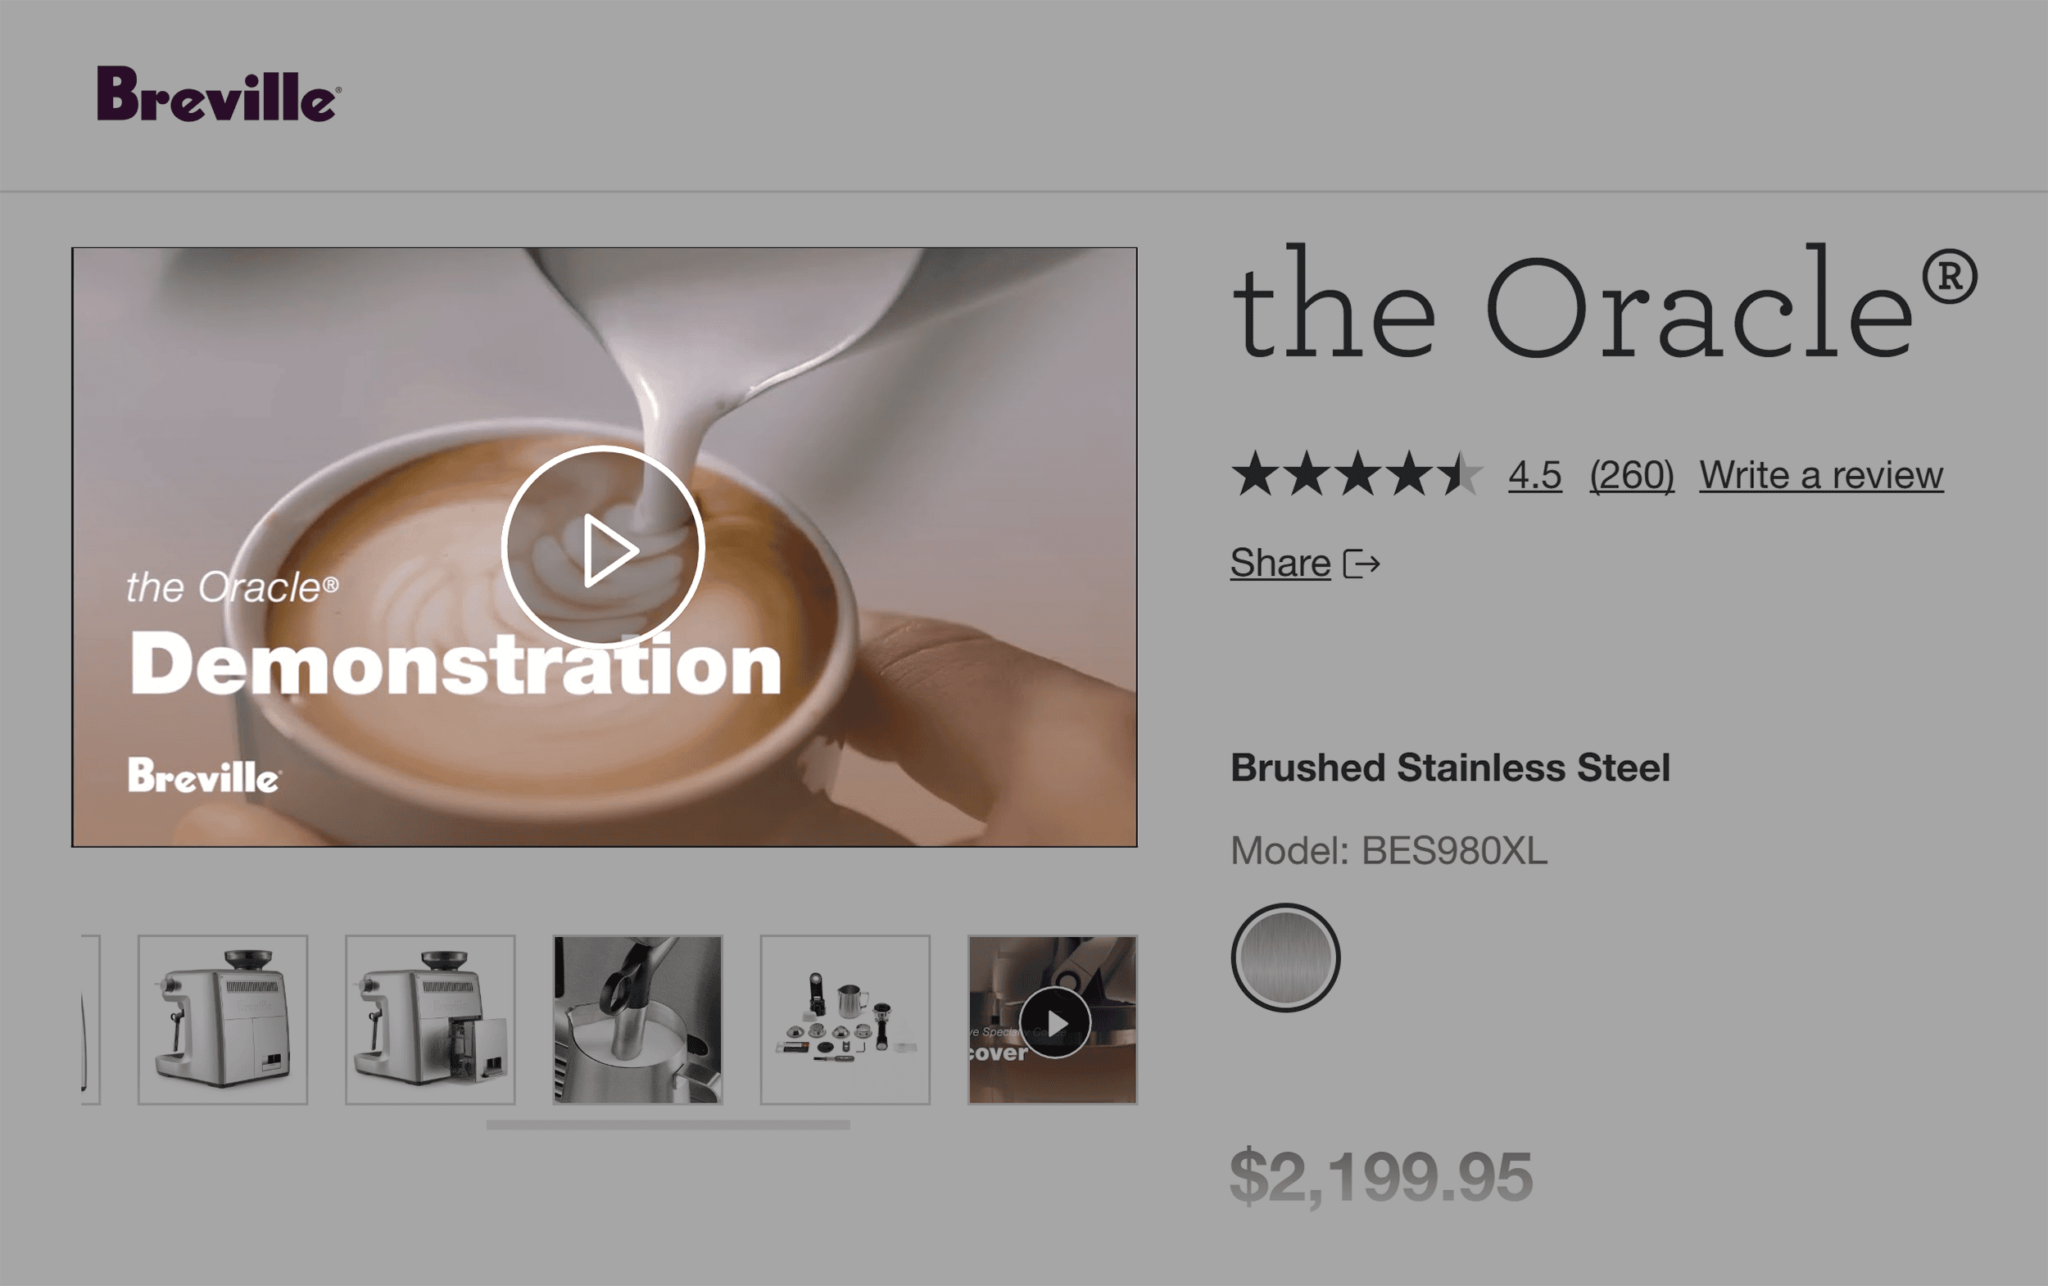 breville-product-video 20 Effective Product Page Examples (+ Best Practices)